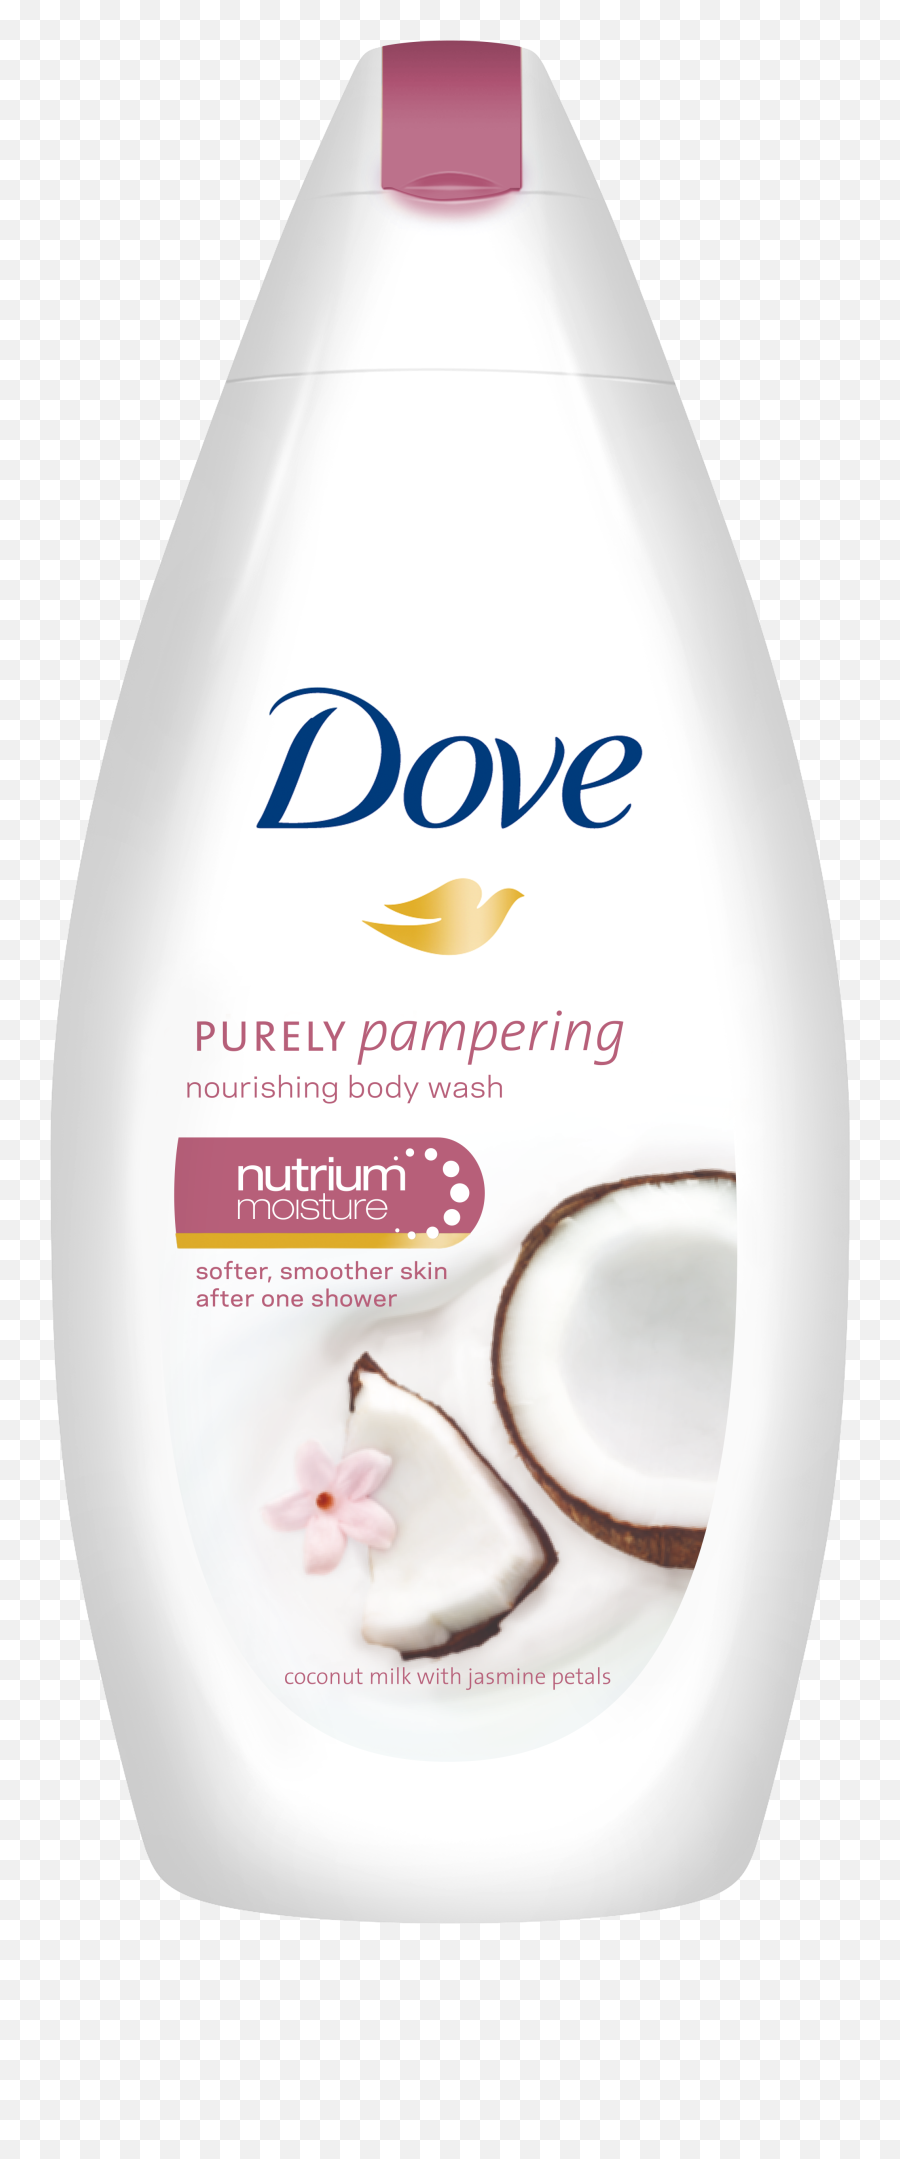 Recreate A Relaxing Bath - Dove Purely Pampering Body Wash Coconut Milk Emoji,Emotions Hair Product